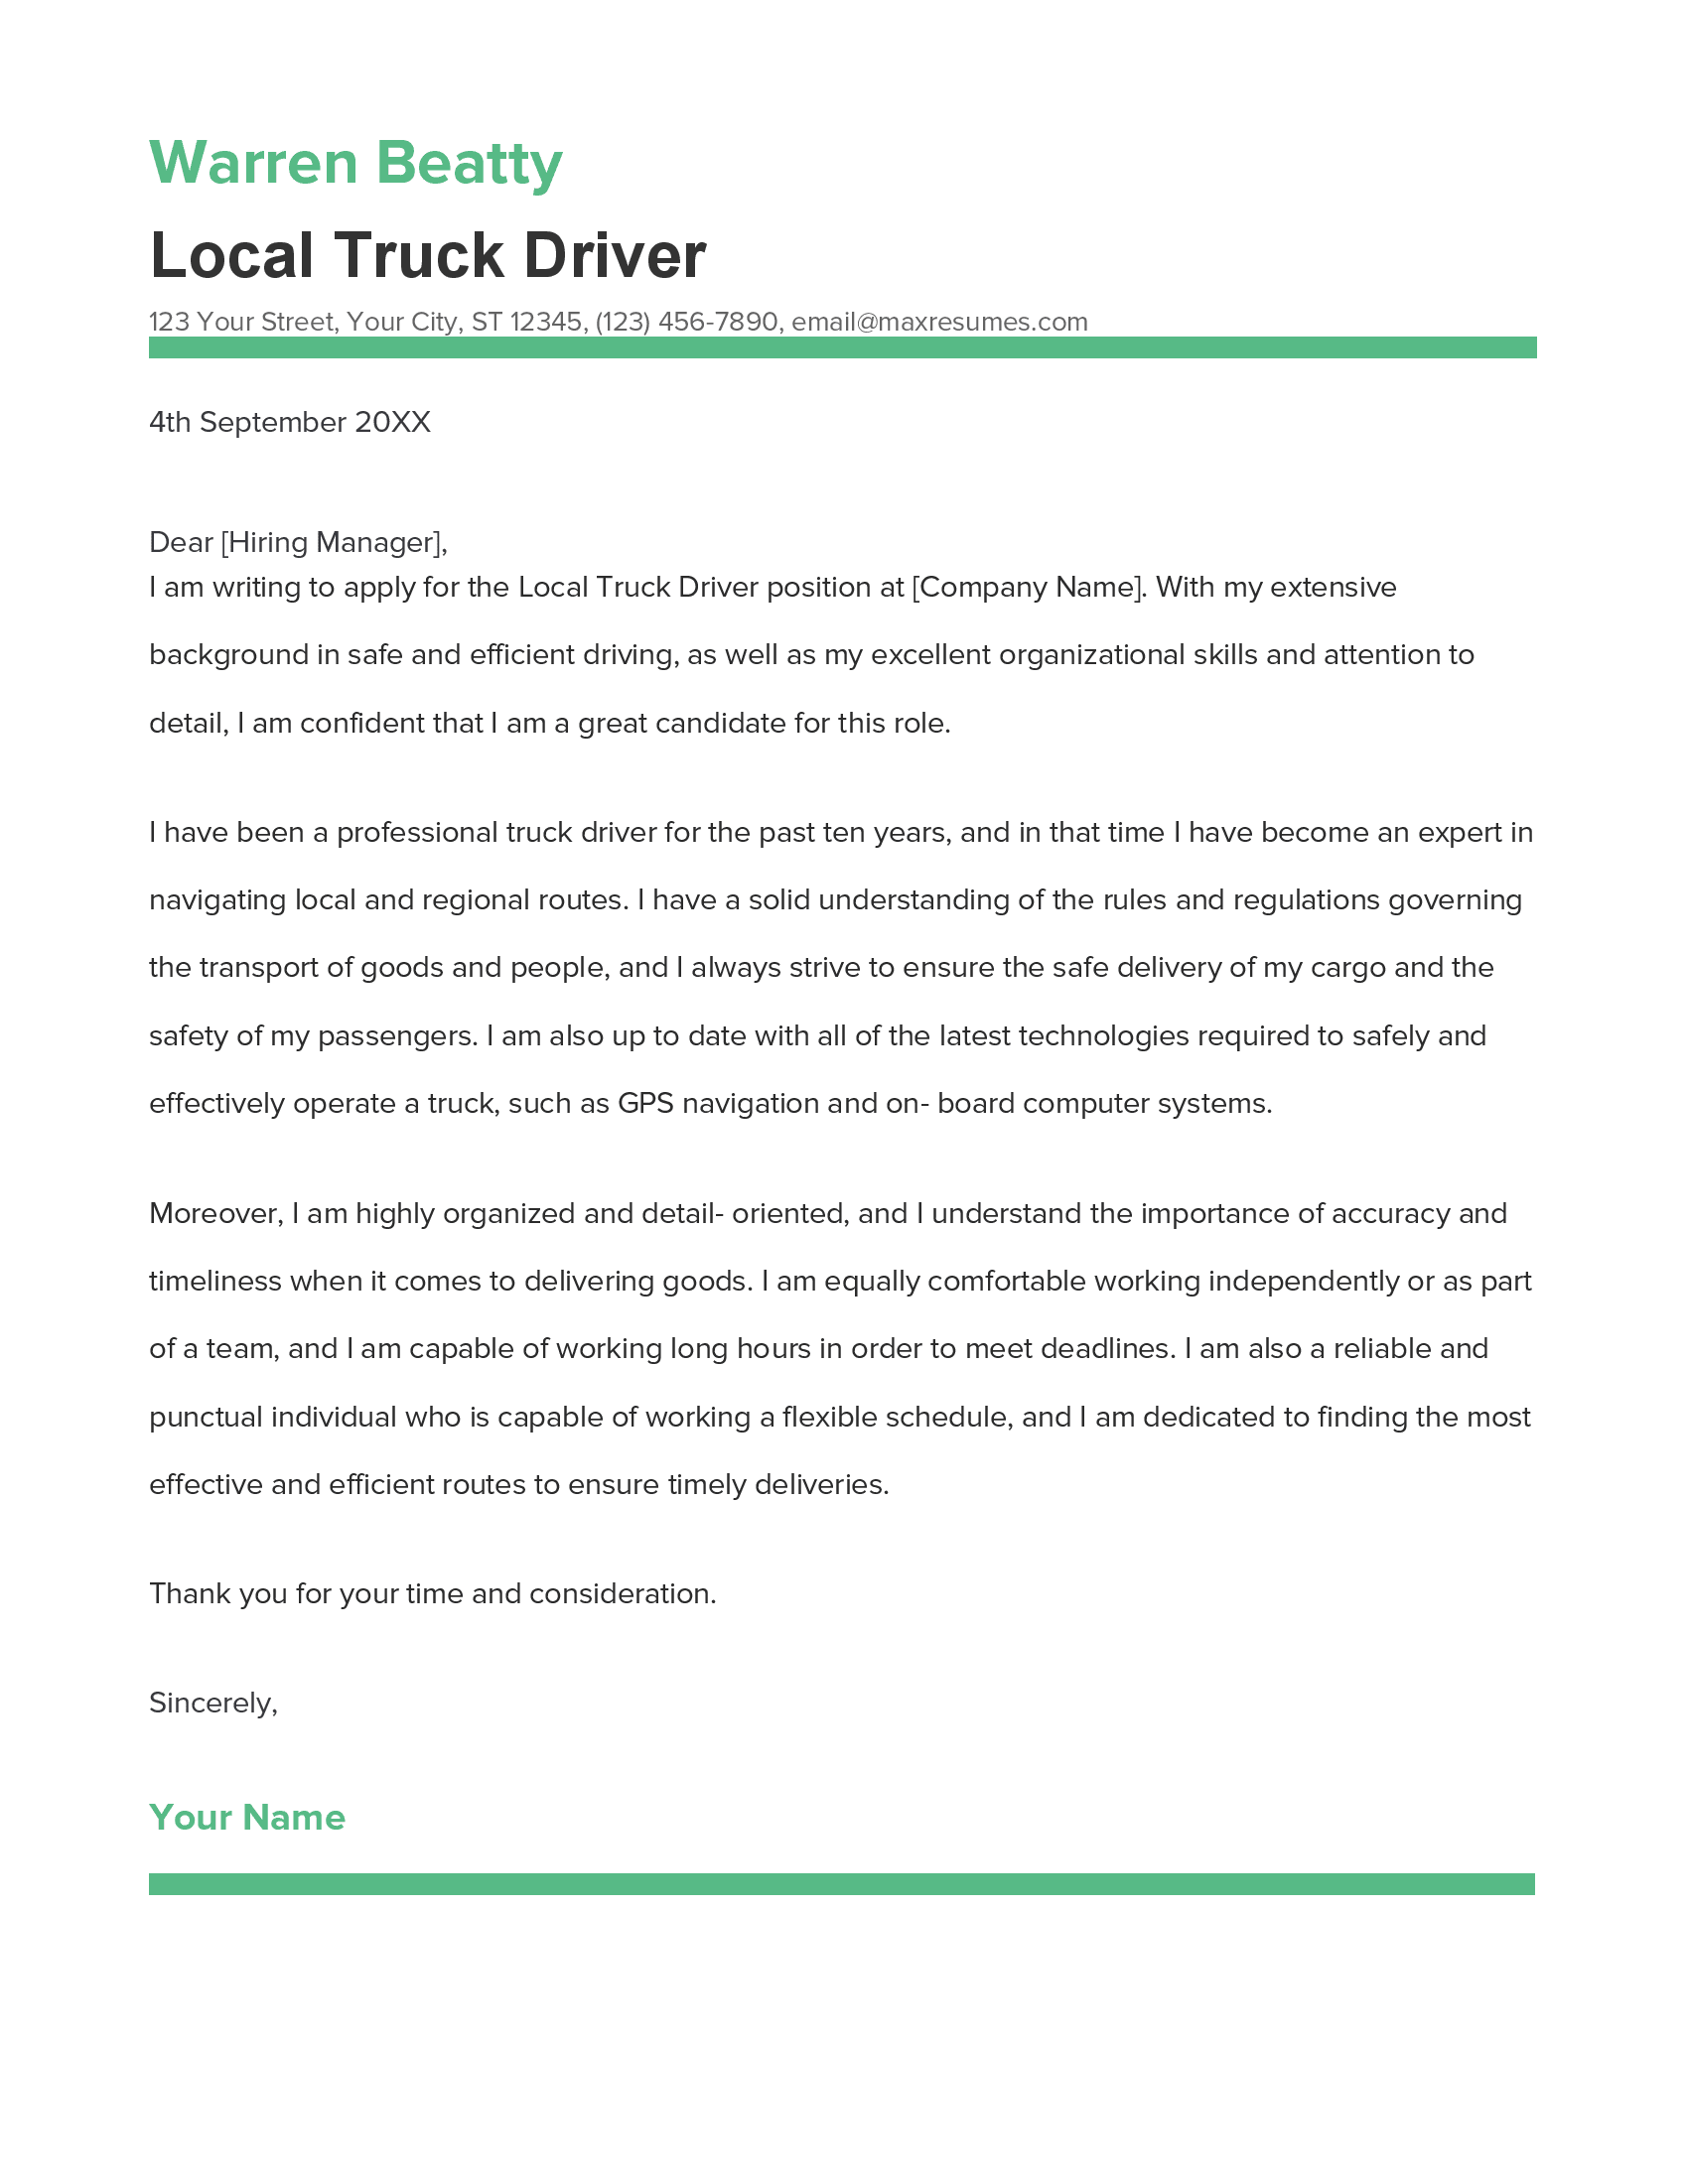 Local Truck Driver Cover Letter Example